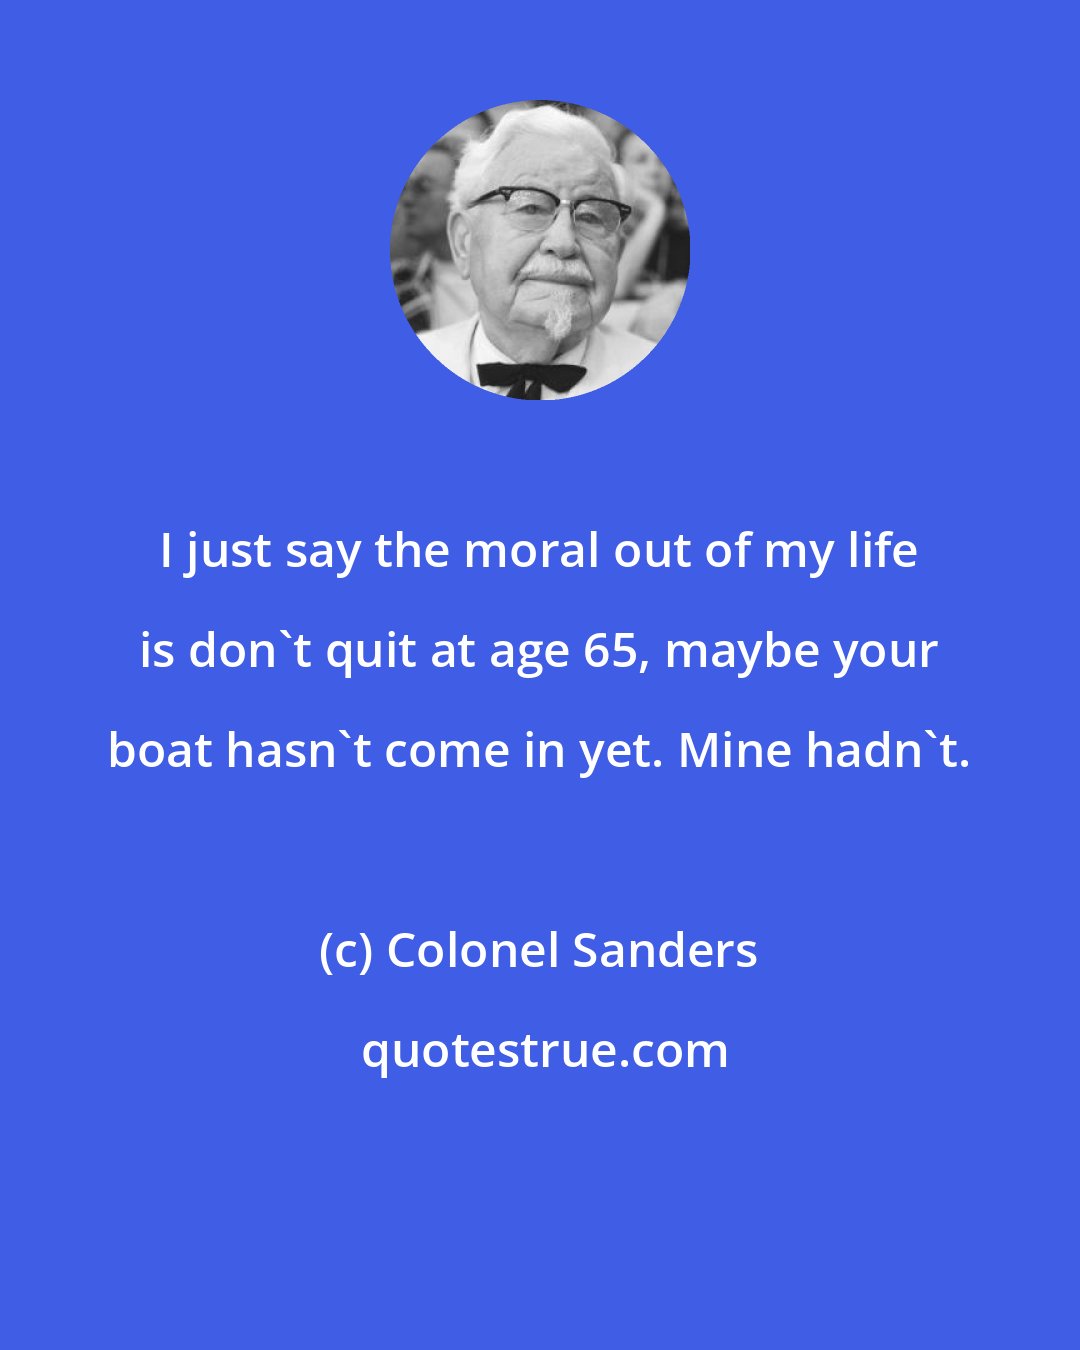 Colonel Sanders: I just say the moral out of my life is don't quit at age 65, maybe your boat hasn't come in yet. Mine hadn't.